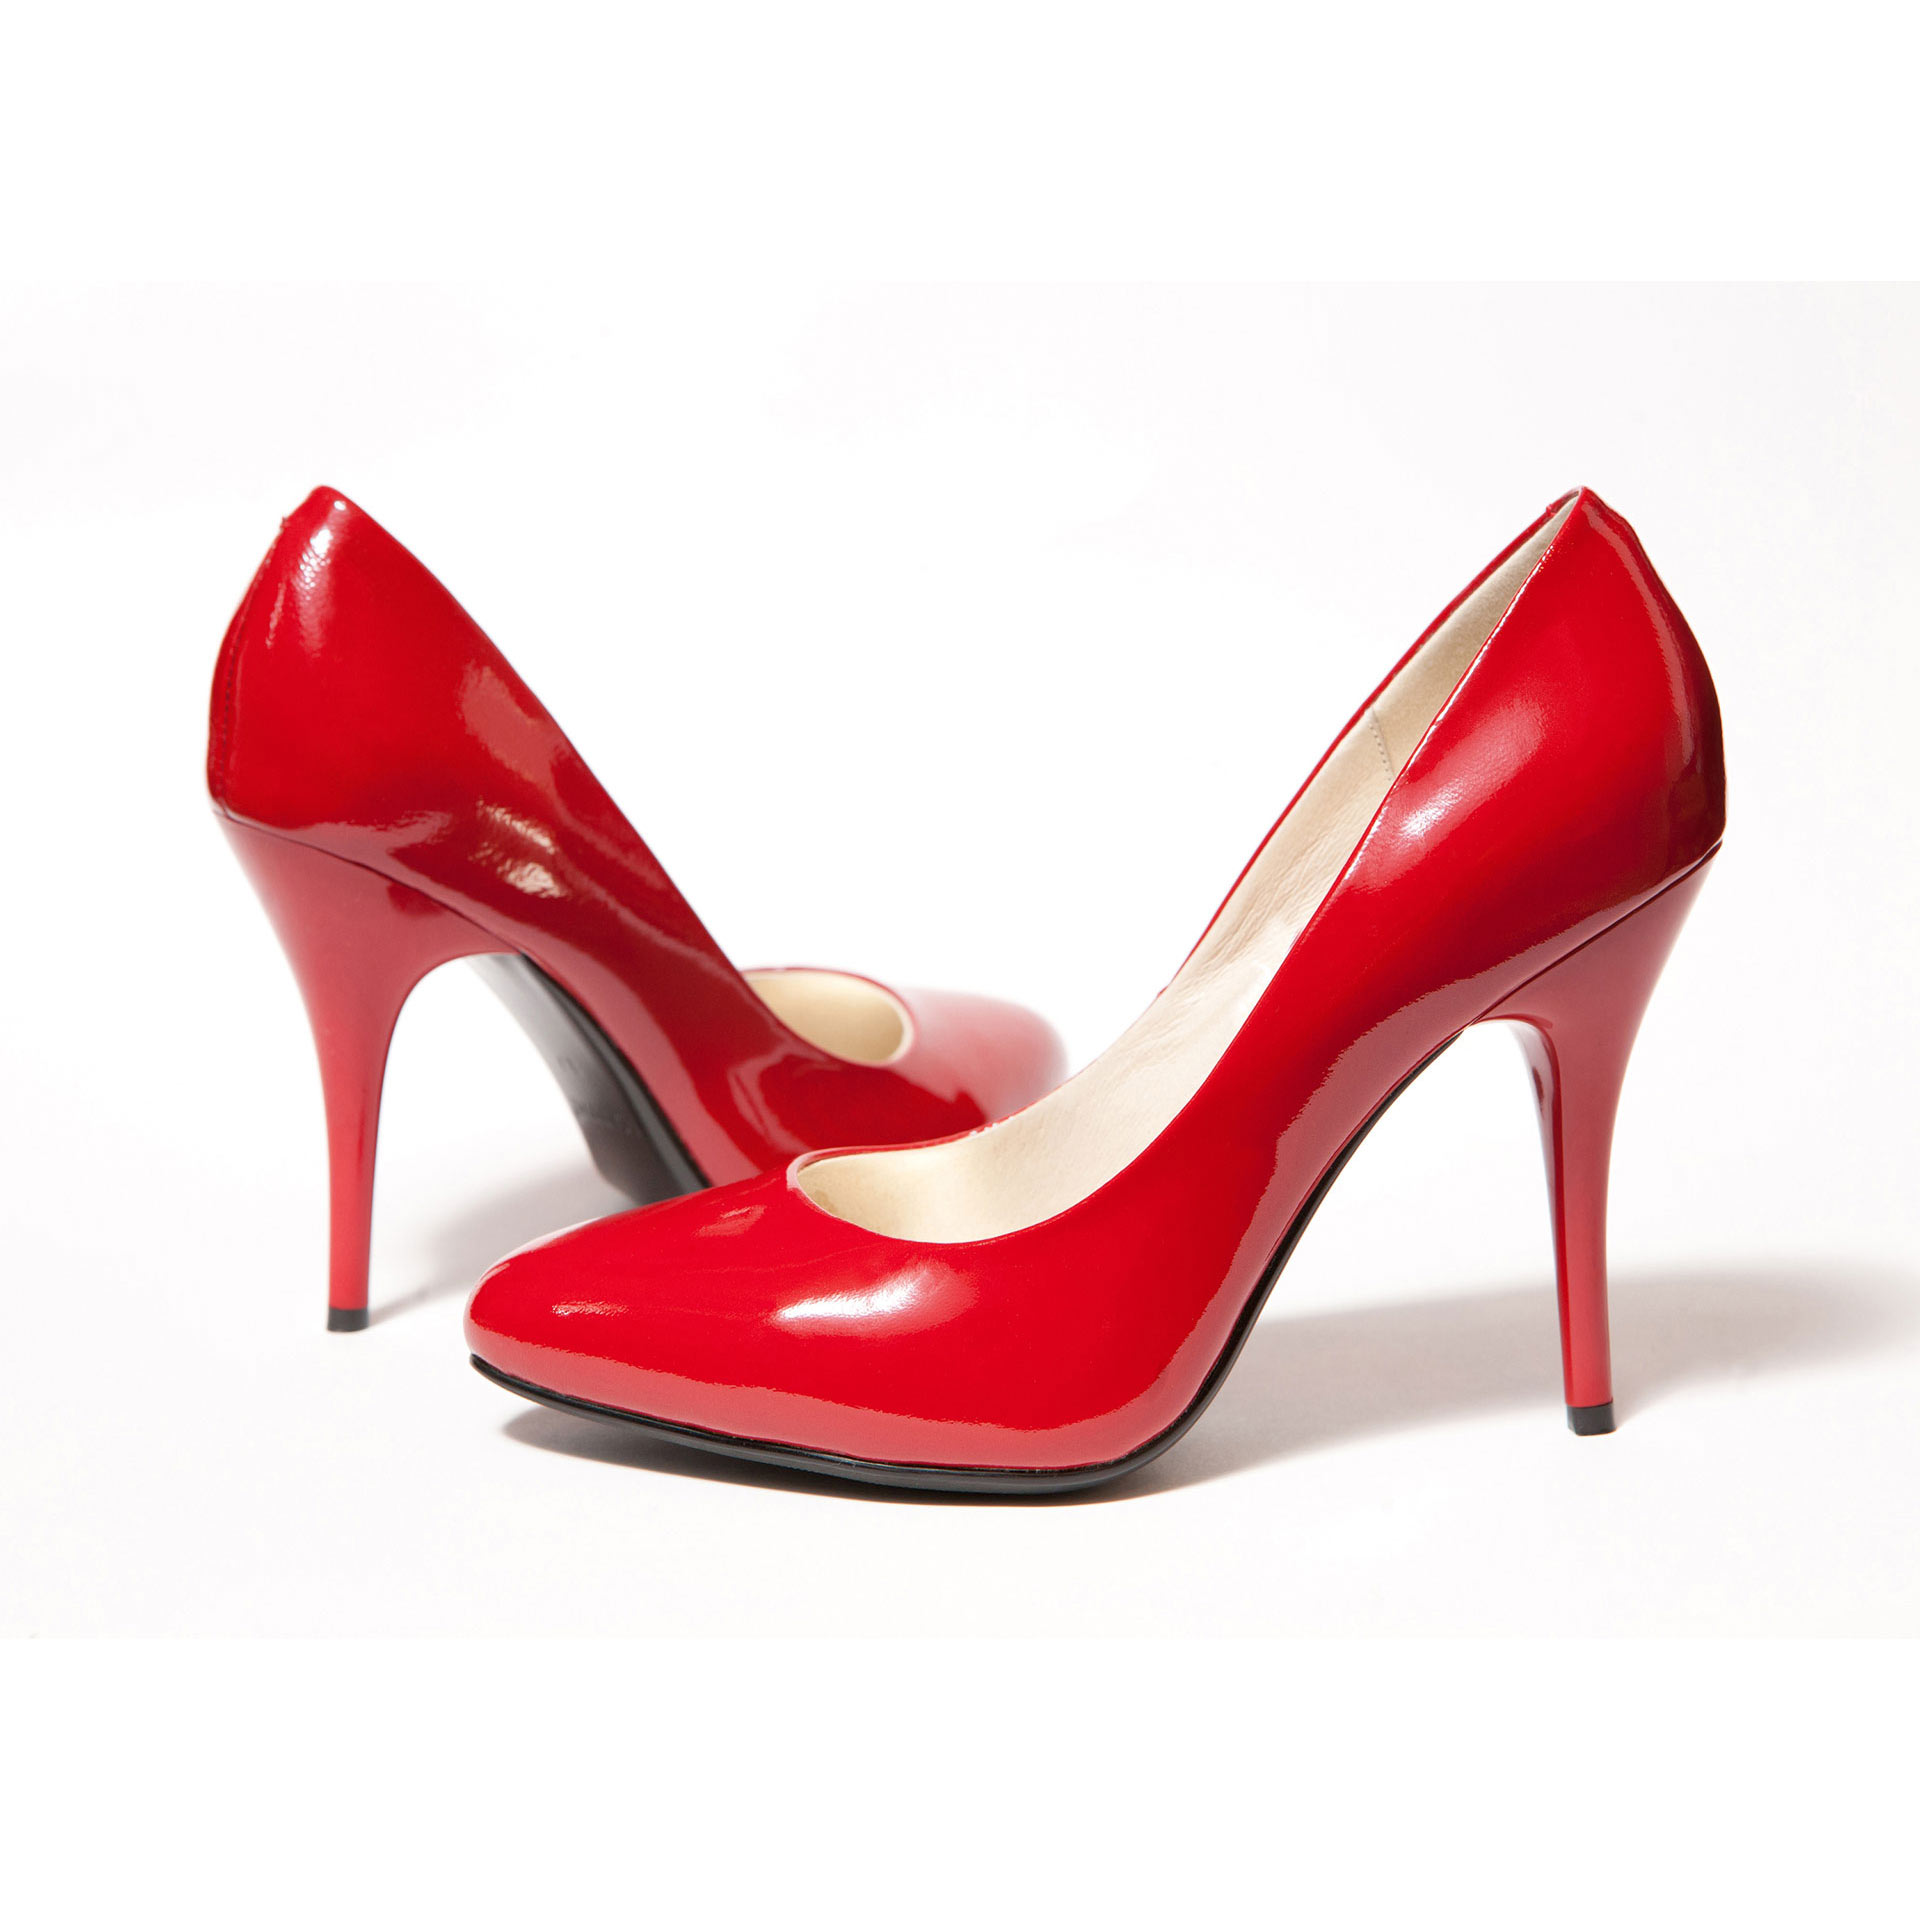 Red High Heel Women Shoes On White Background